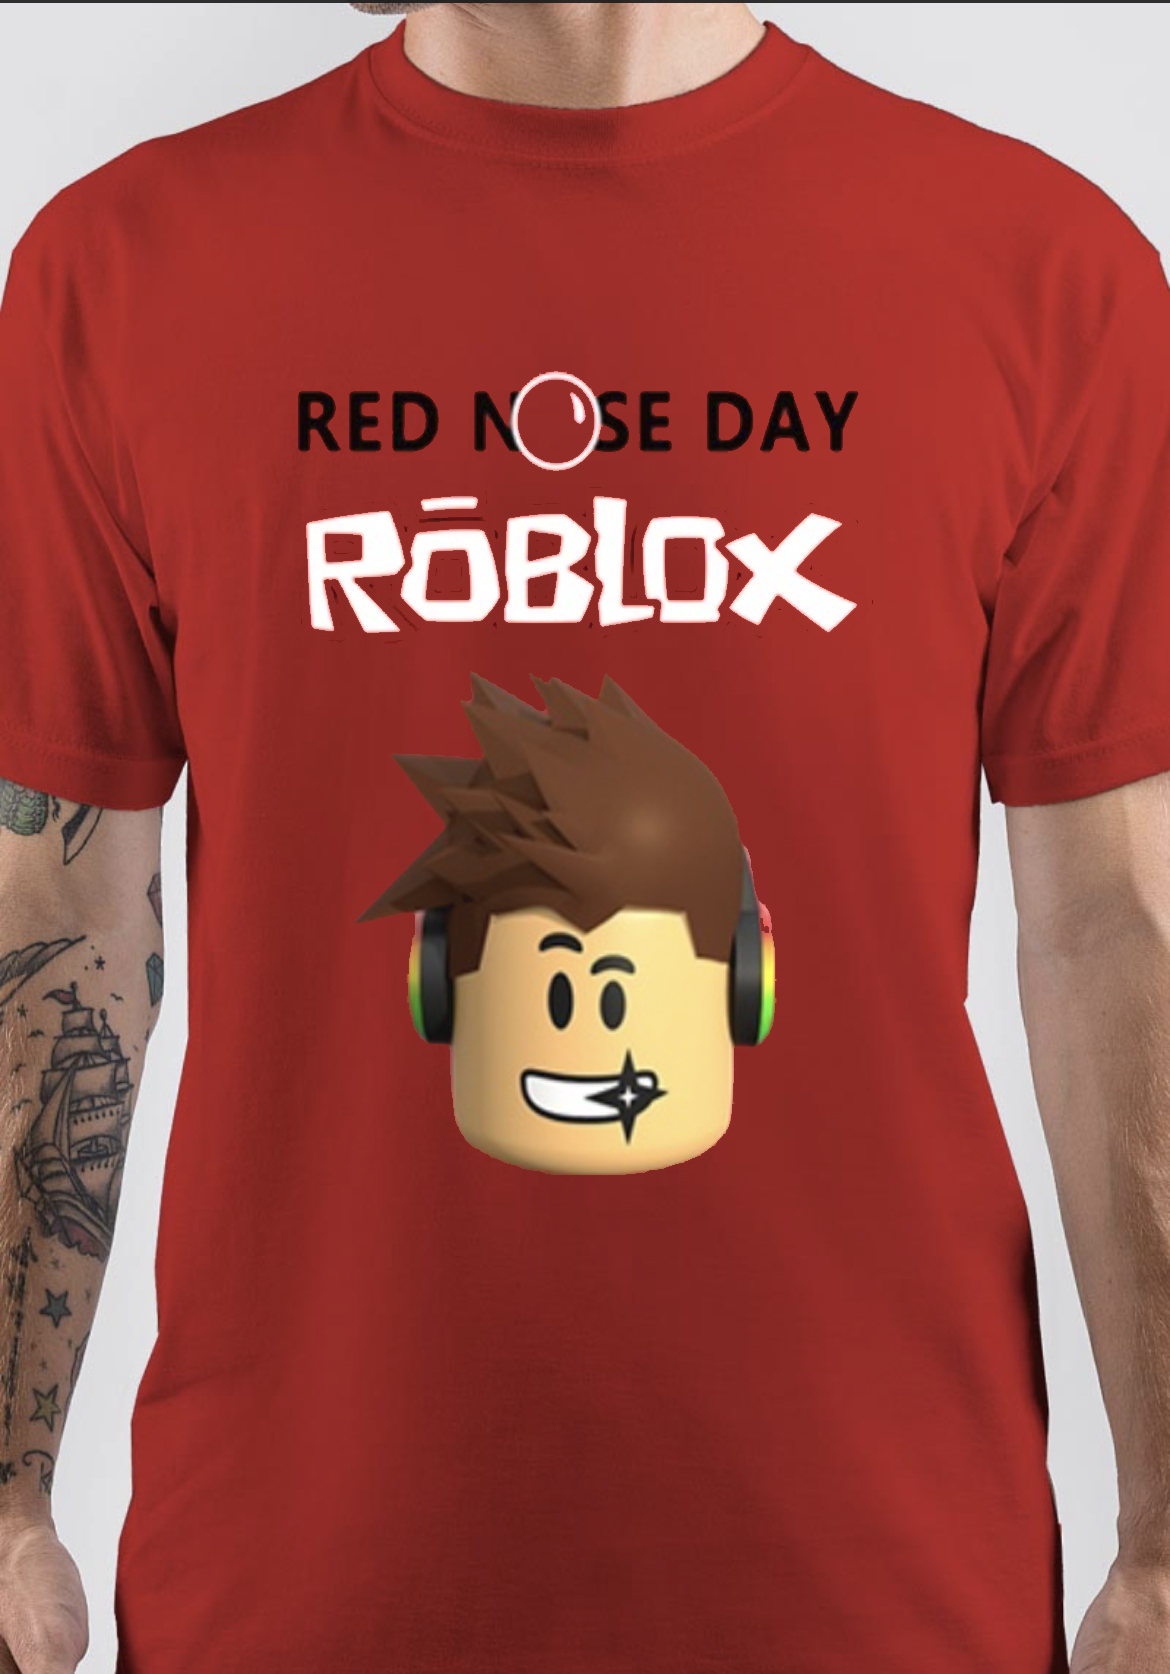 Roblox T-Shirt And Merchandise